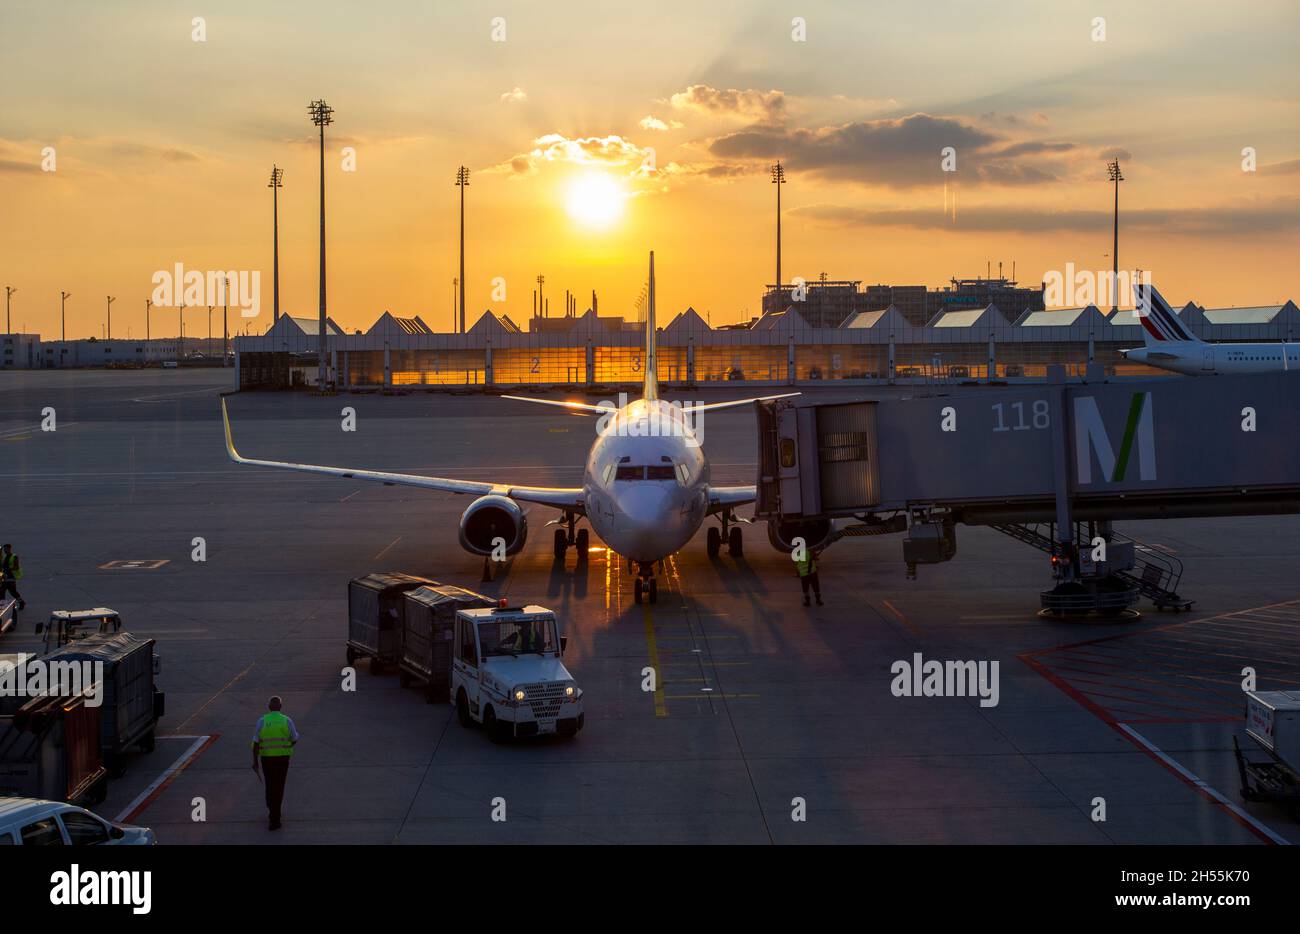 A munich, germany - 26 september 2016. Munich-Franz Josef Strauss International Airport. image of the airport at sunset. a plane is seen preparing for Stock Photo